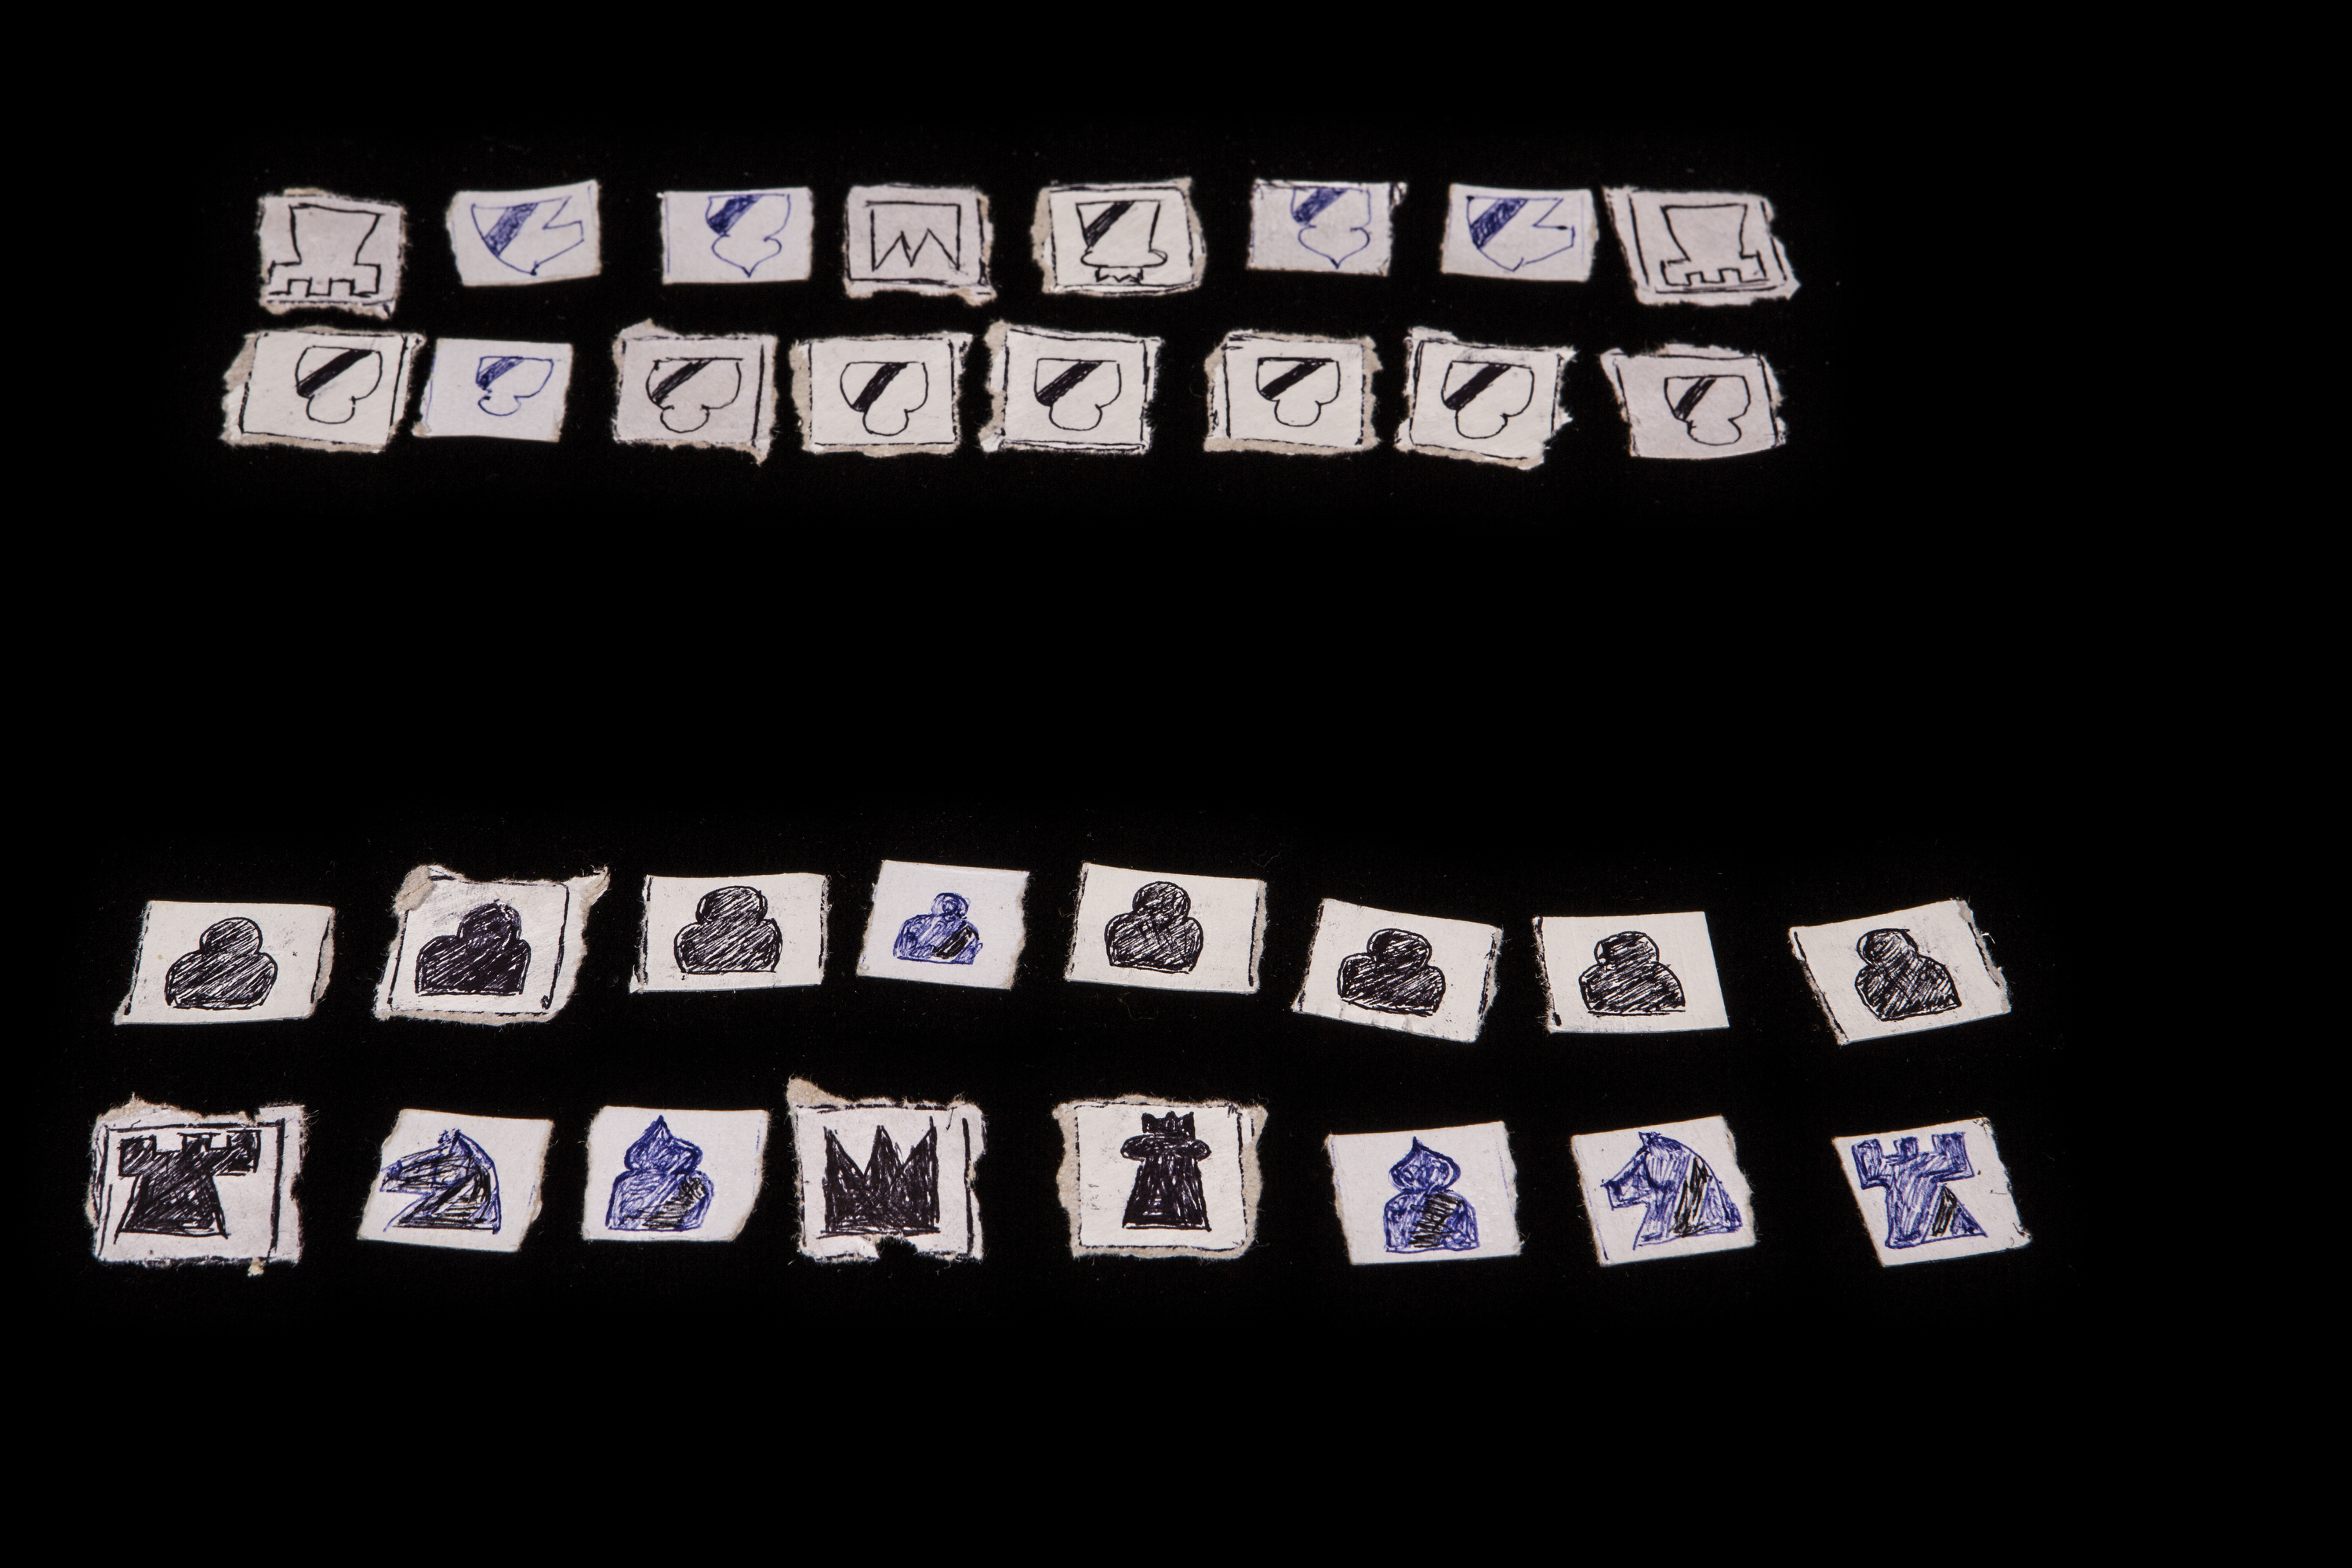 ISIS chess set.  The chess set made by the group of Western hostages held in Northern Syria by ISIS, Aug 8, 2014.